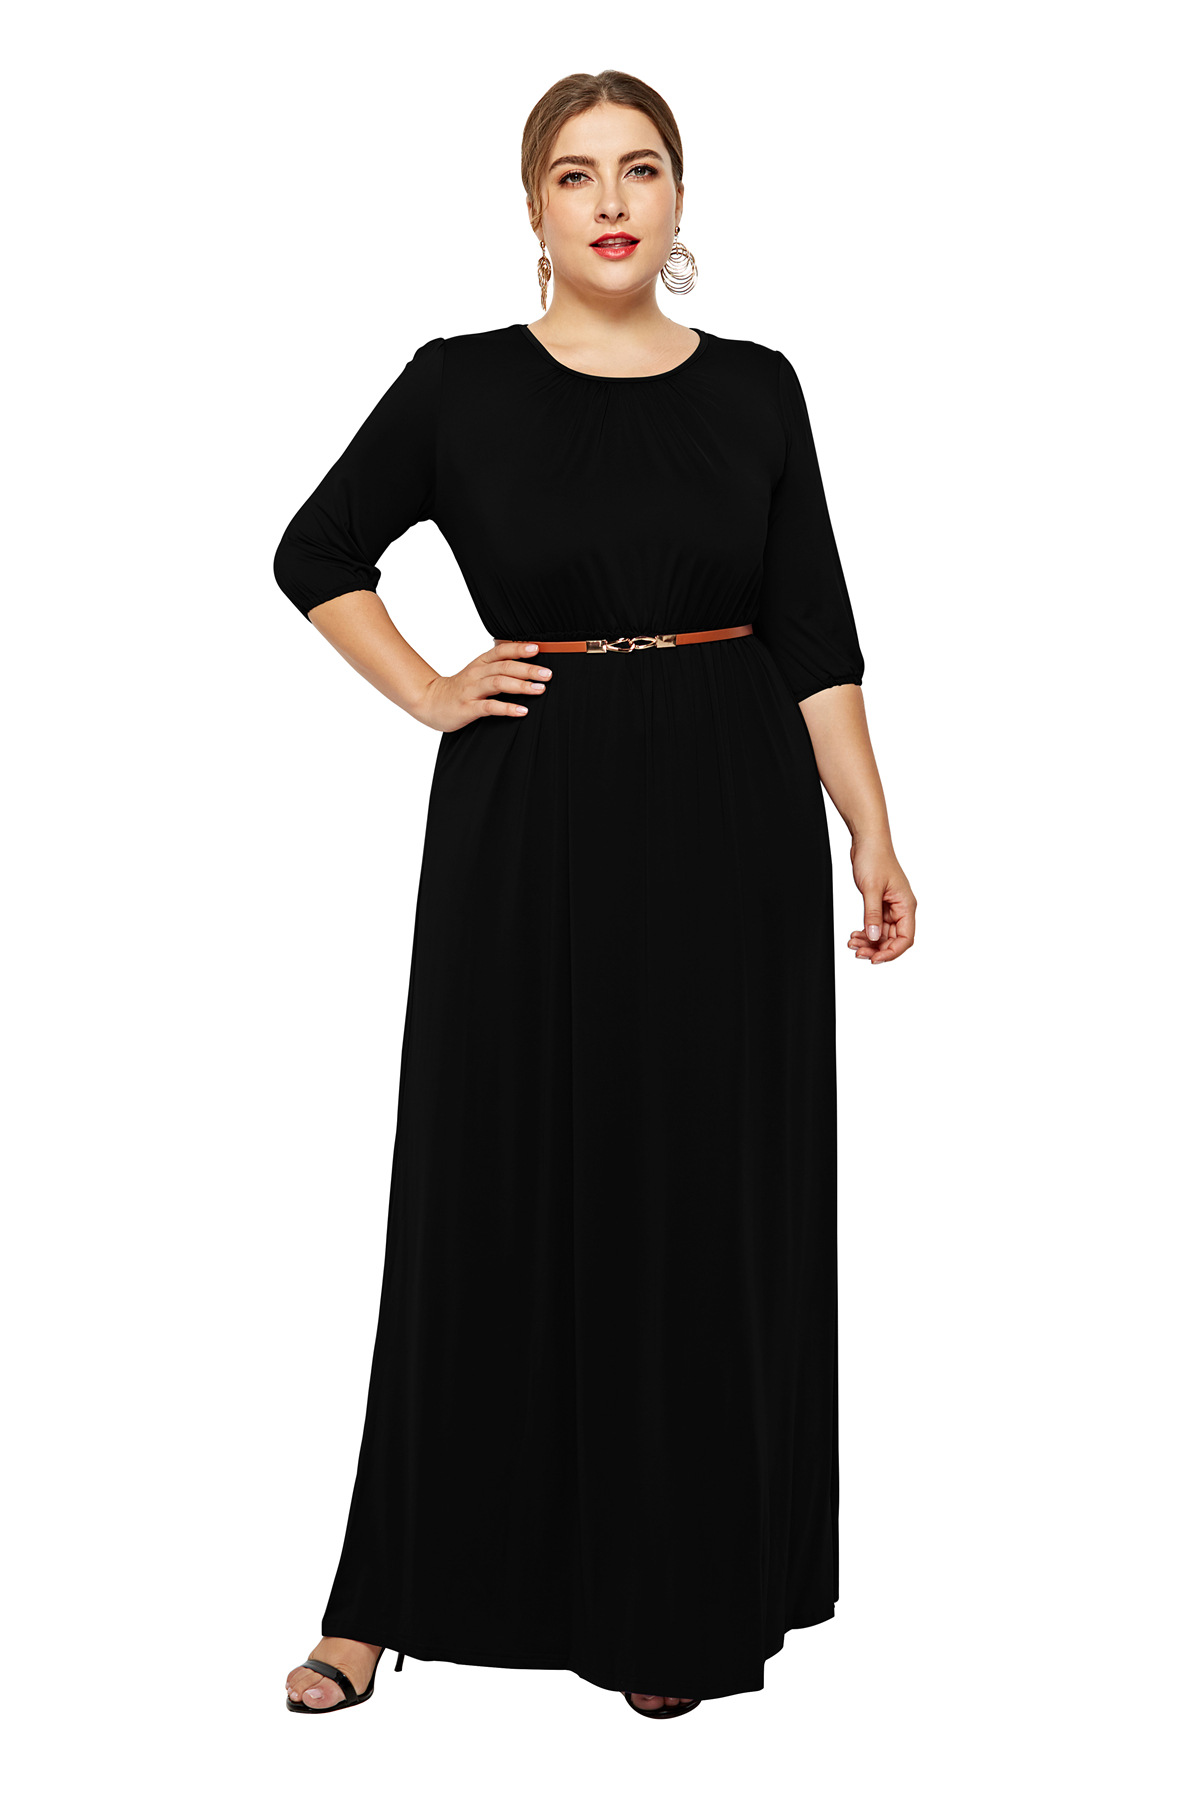 Women Maxi Dress O-Neck 3/4 Sleeve Belted Plus Size Long Formal Party Dress black